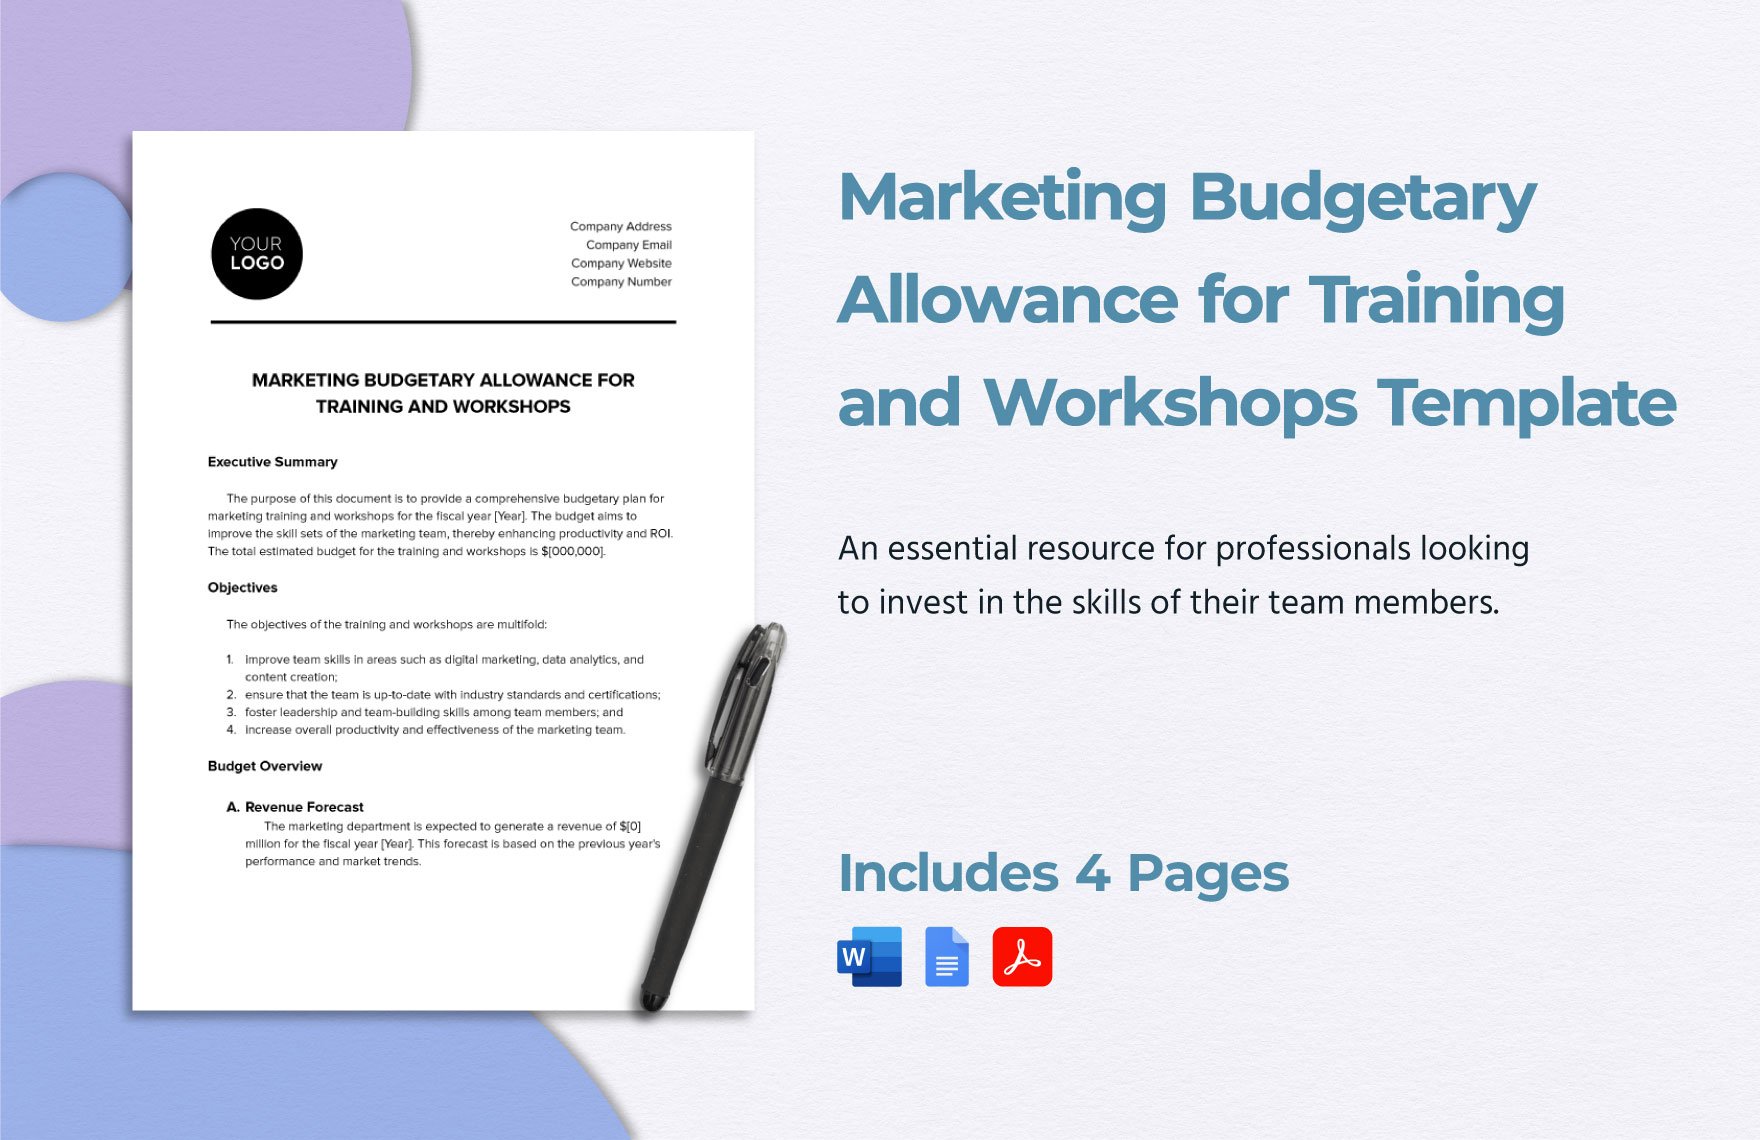 Marketing Budgetary Allowance for Training and Workshops Template